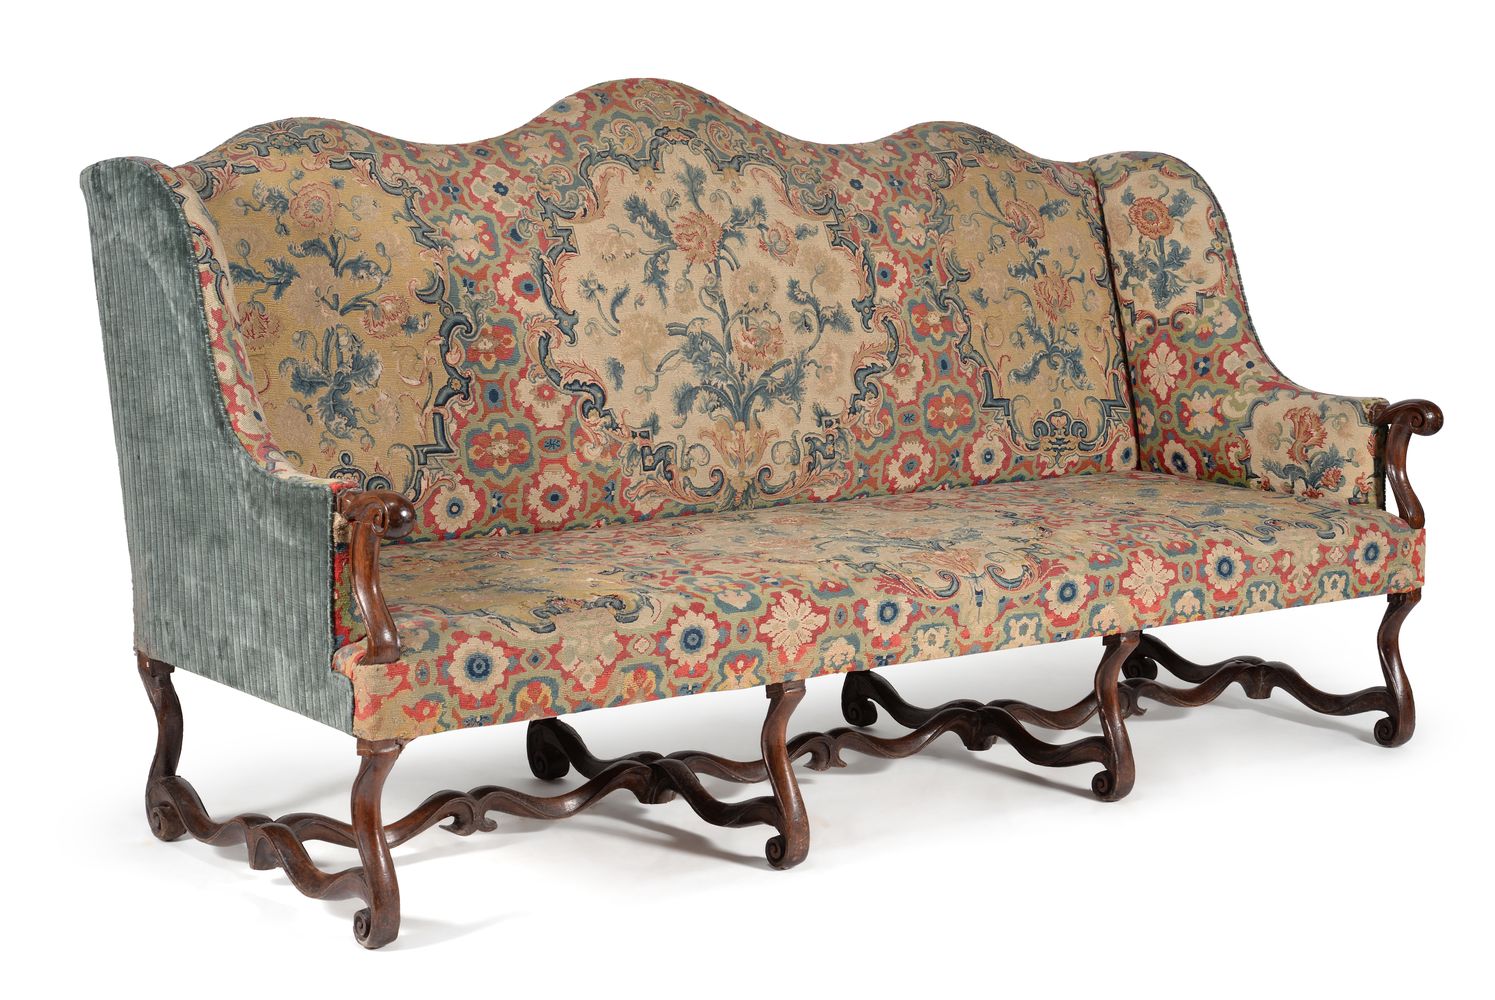 † A French walnut and needlework upholstered settee, 18th century and later elements - Image 2 of 5